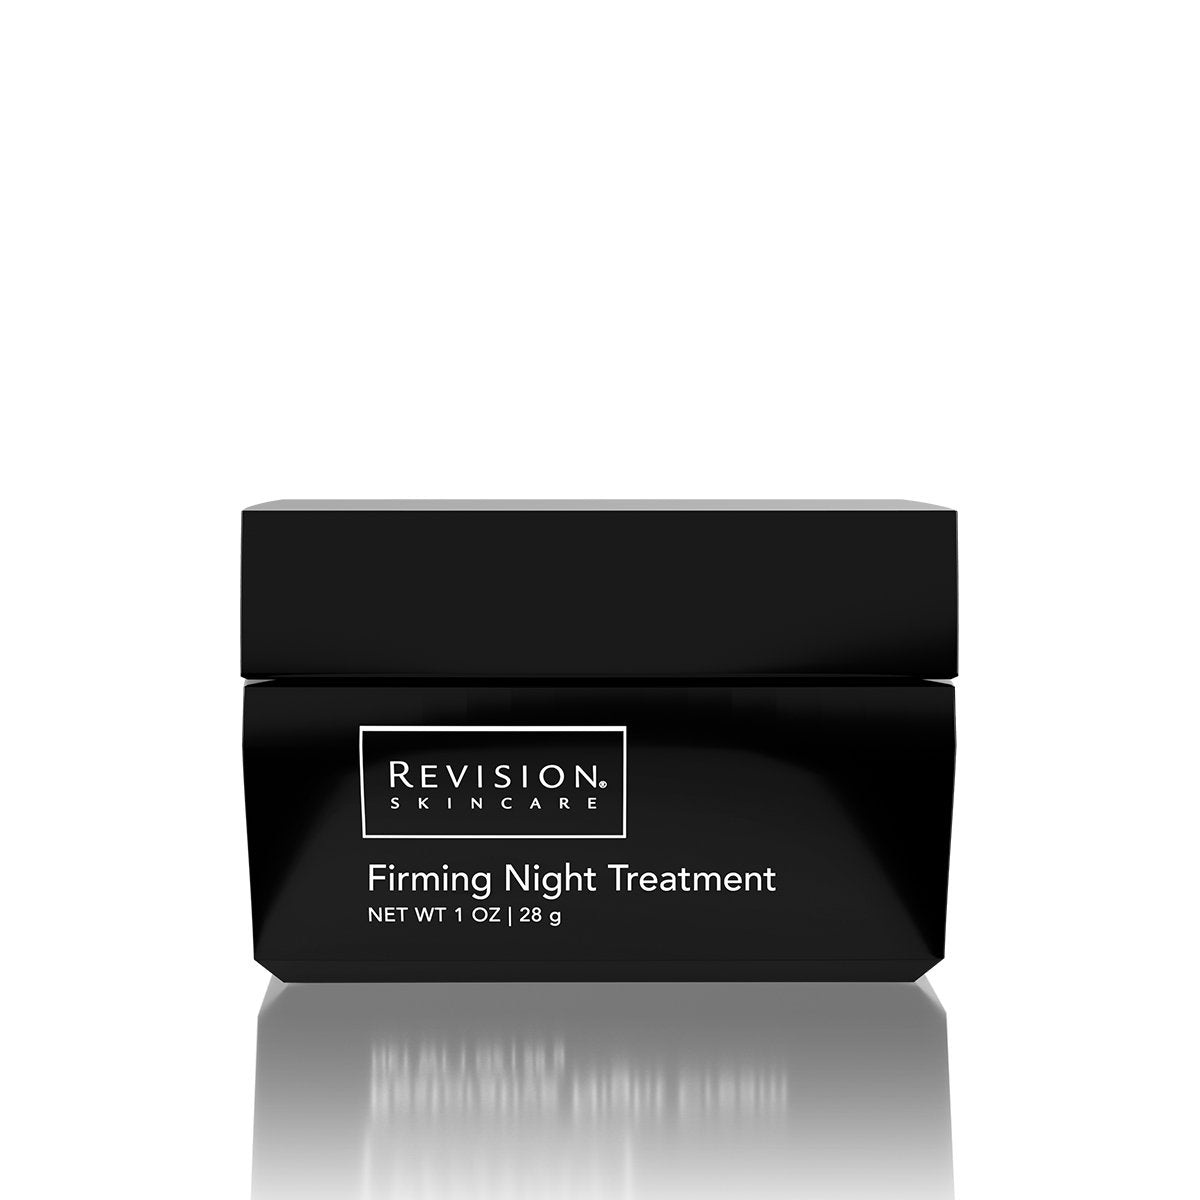 Revision Skincare Firming Night Treatment - Totality Skincare